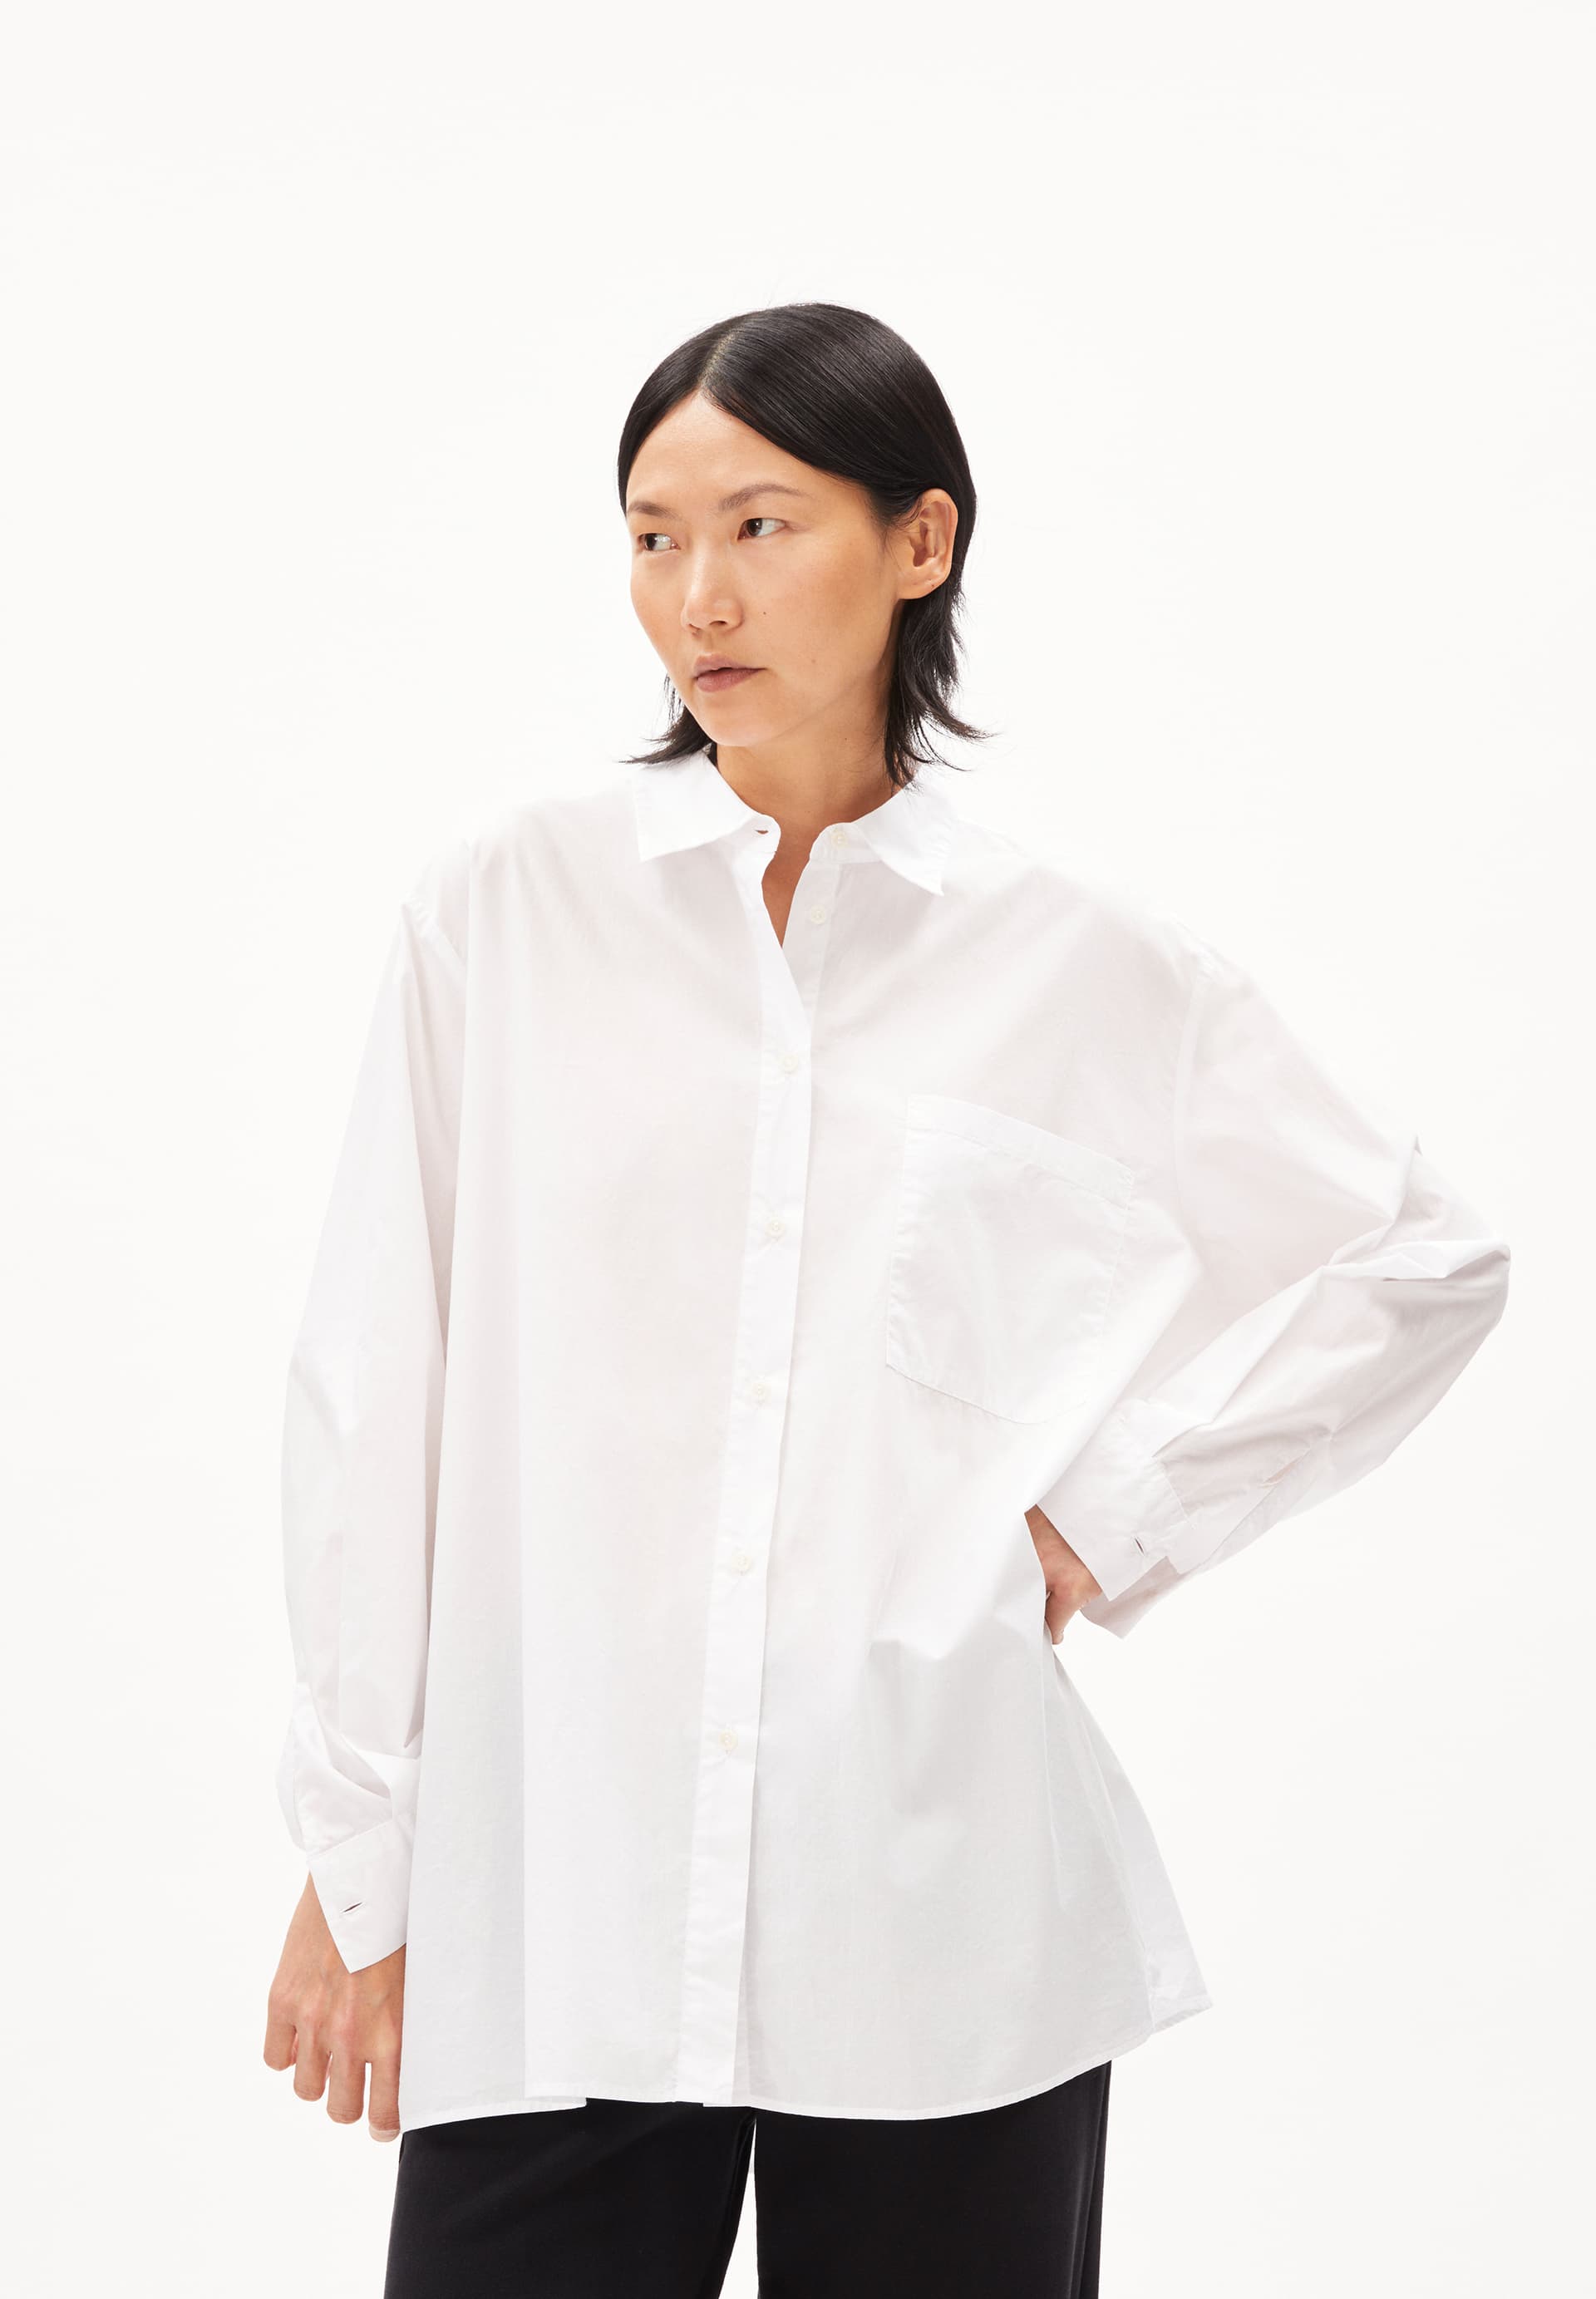 Blouses | Buy more sustainable Fashion for Women | ARMEDANGELS